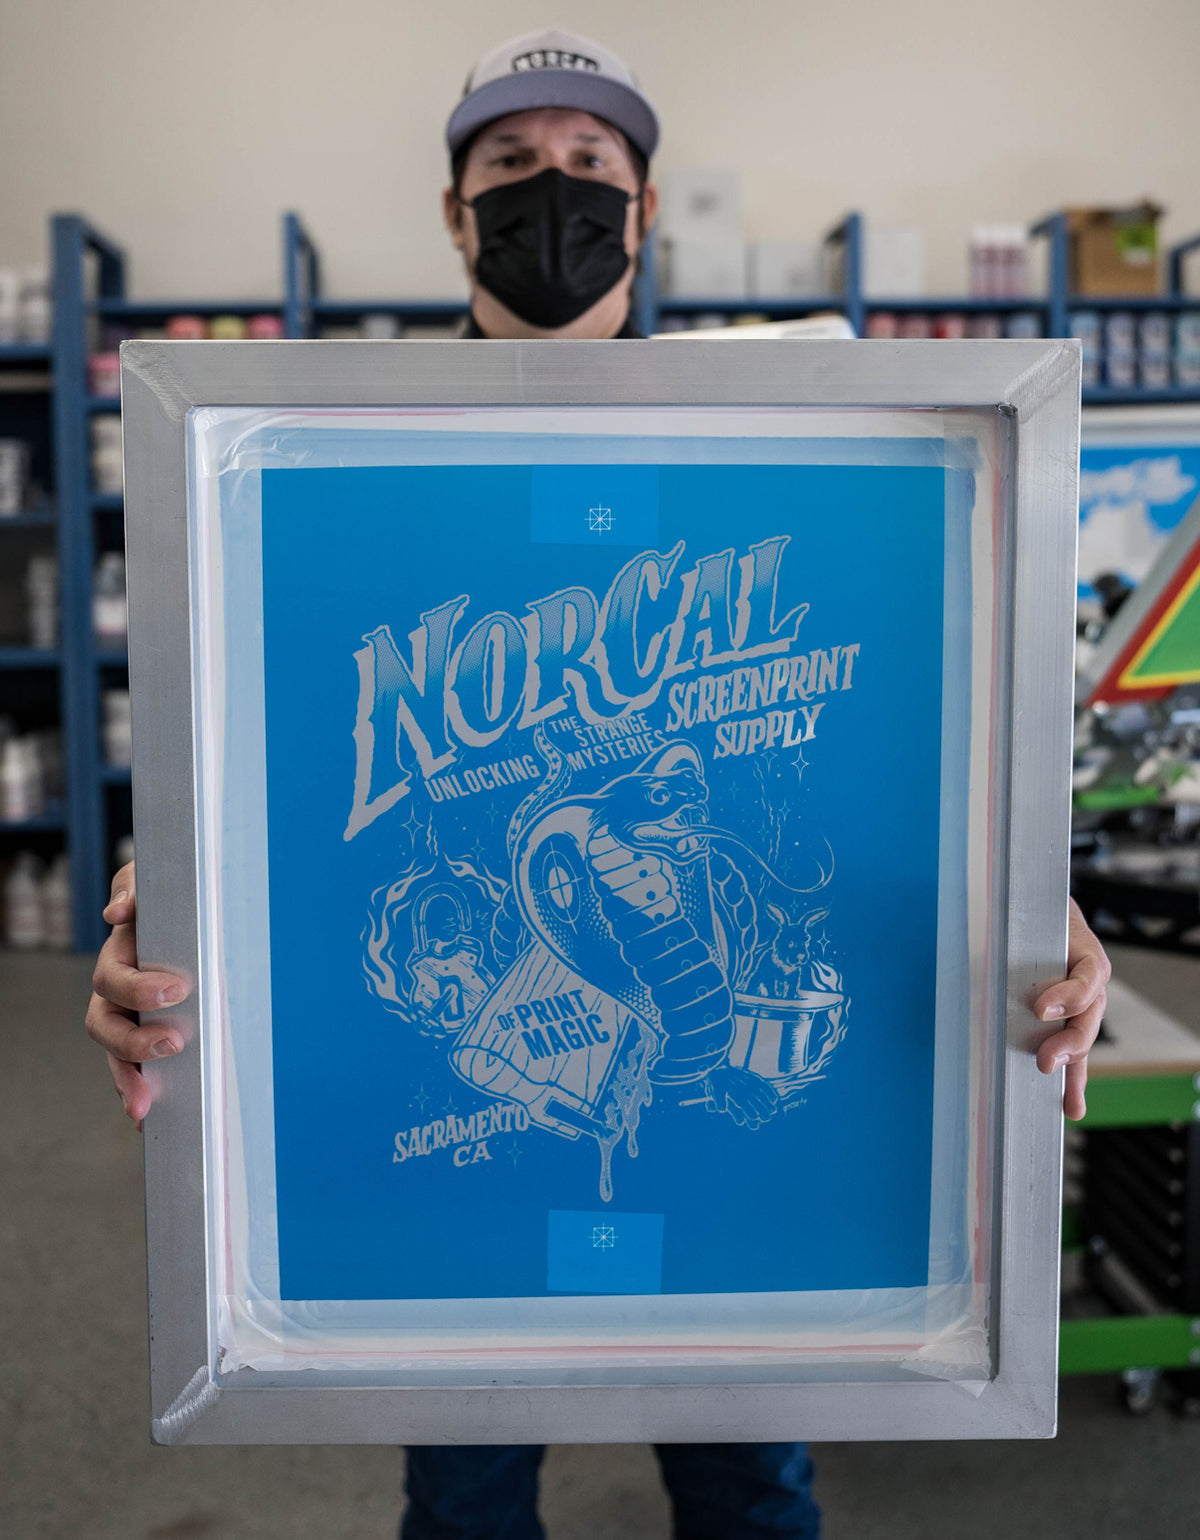 Screen Printing Frames: Wood vs. Aluminum, Which to Choose and Why –  Holden's Screen Supply